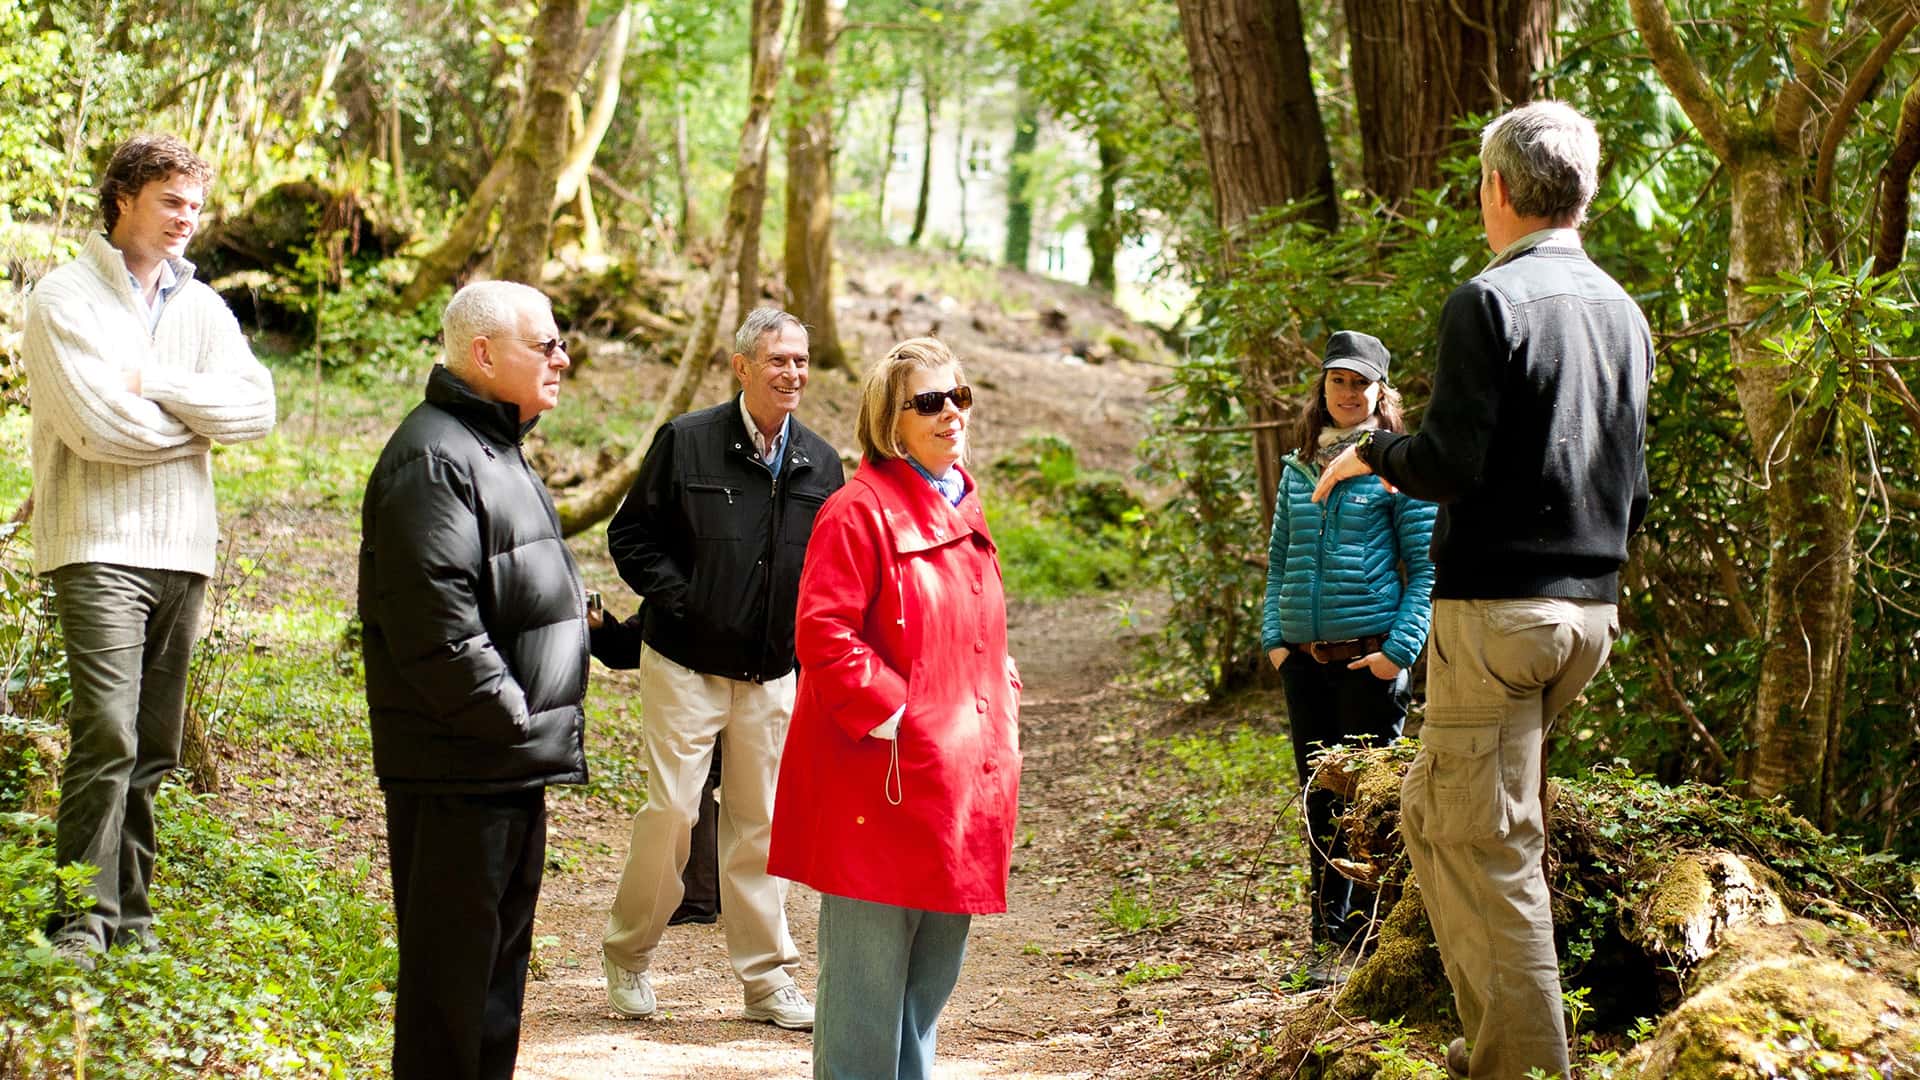 Group of adults engaged in conversation on a private tour through an Ireland forest trail.